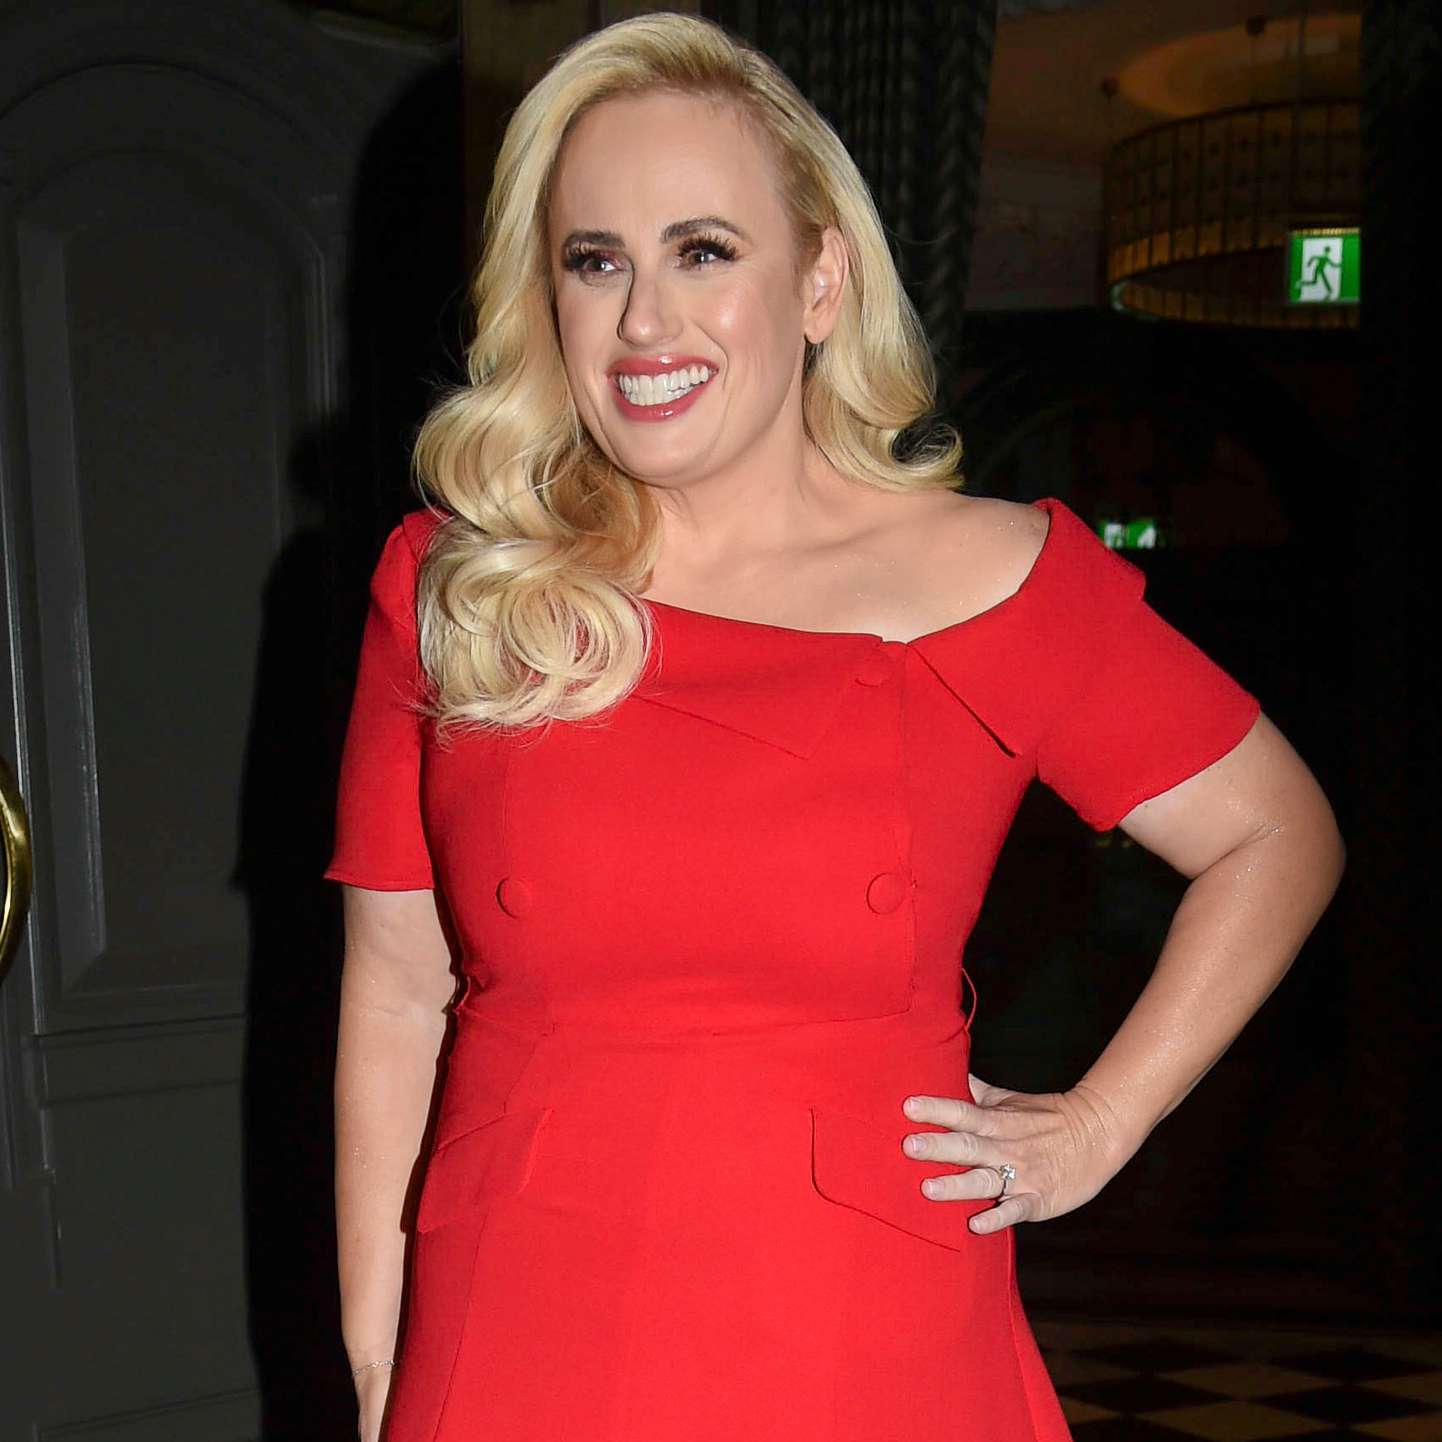 Rebel Wilson turns heads as she steps out of a Manchester hotel, showcasing her chic style in a striking red dress.